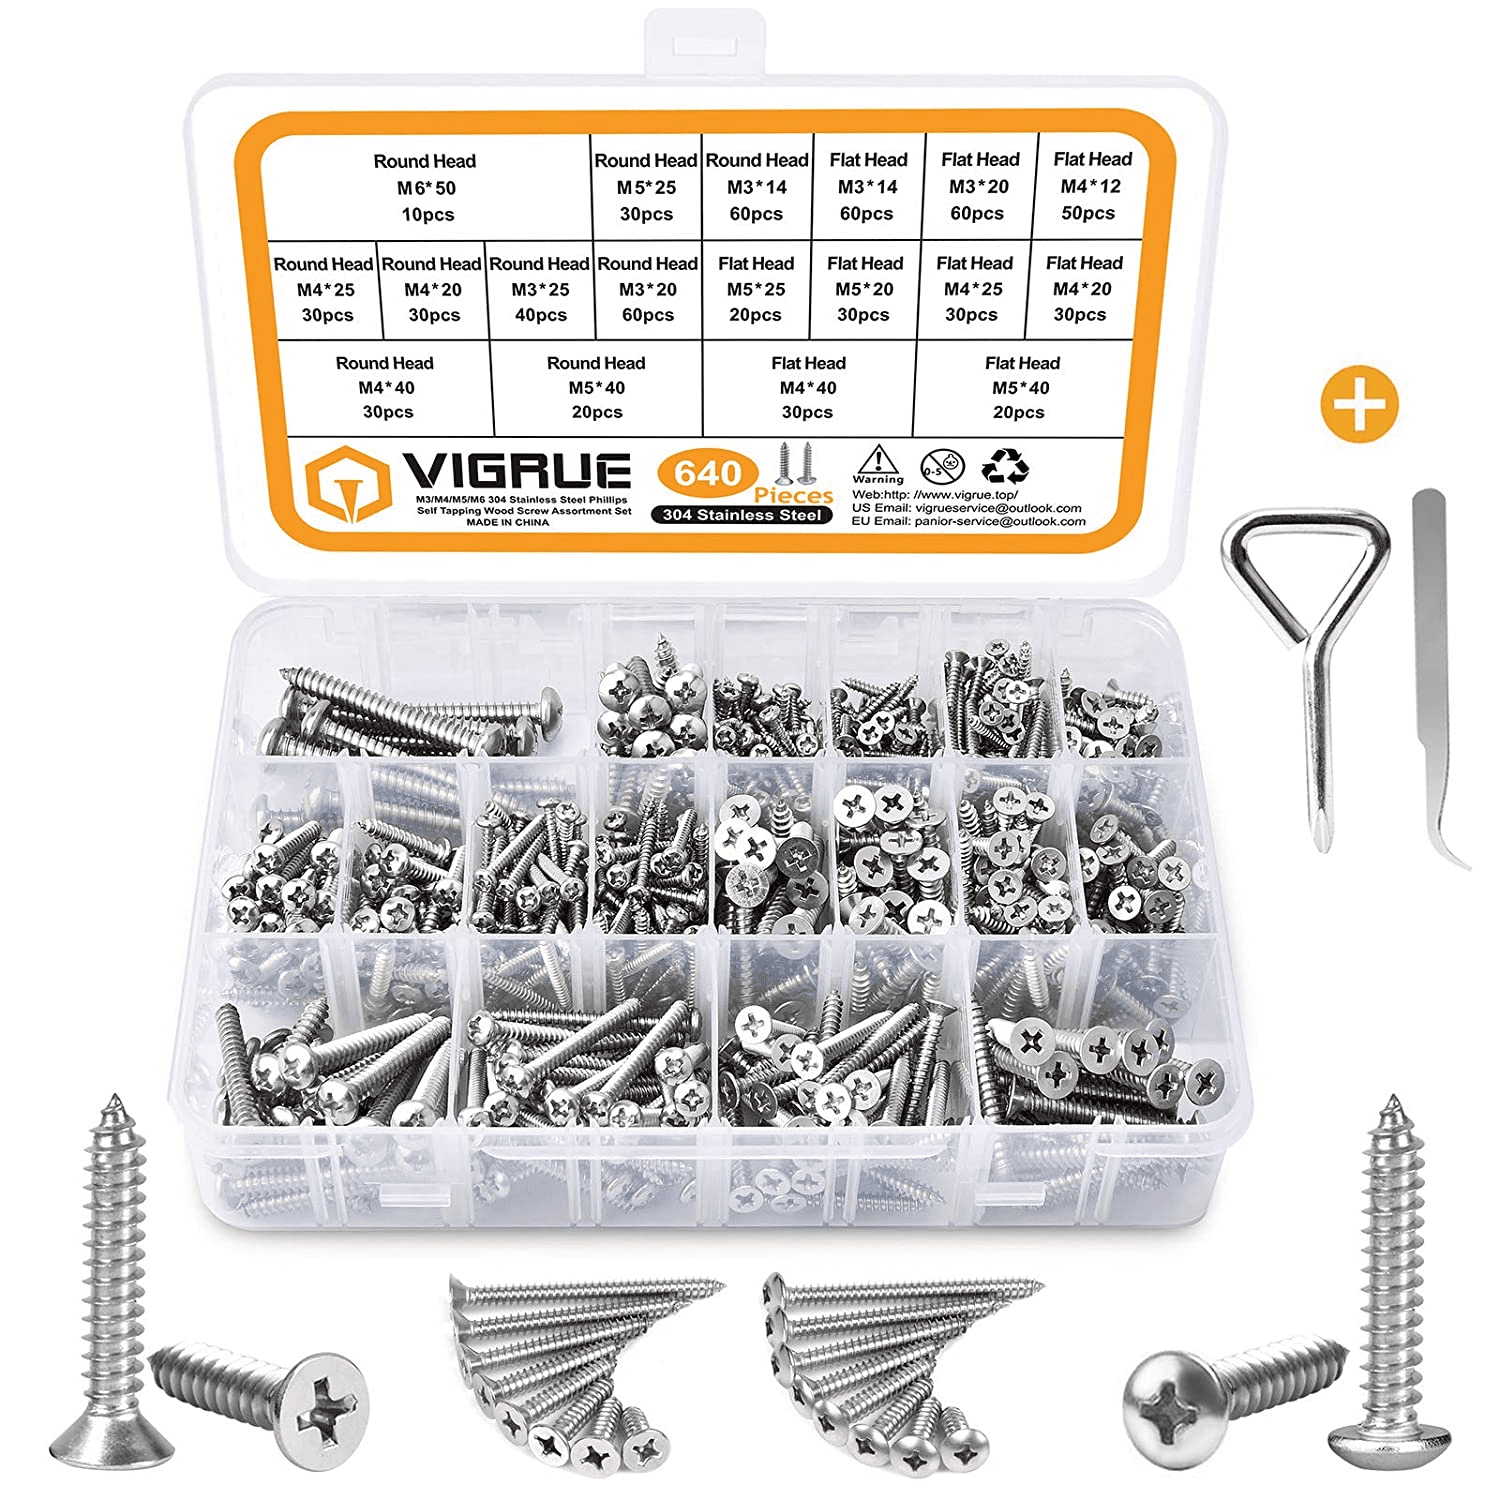 VIGRUE Screws Bolt Nut Flat Washers 304 Stainless Steel Machine Screws Assortment Kit with Wrench and Storage Case #8-32#10-24 1/4-20 